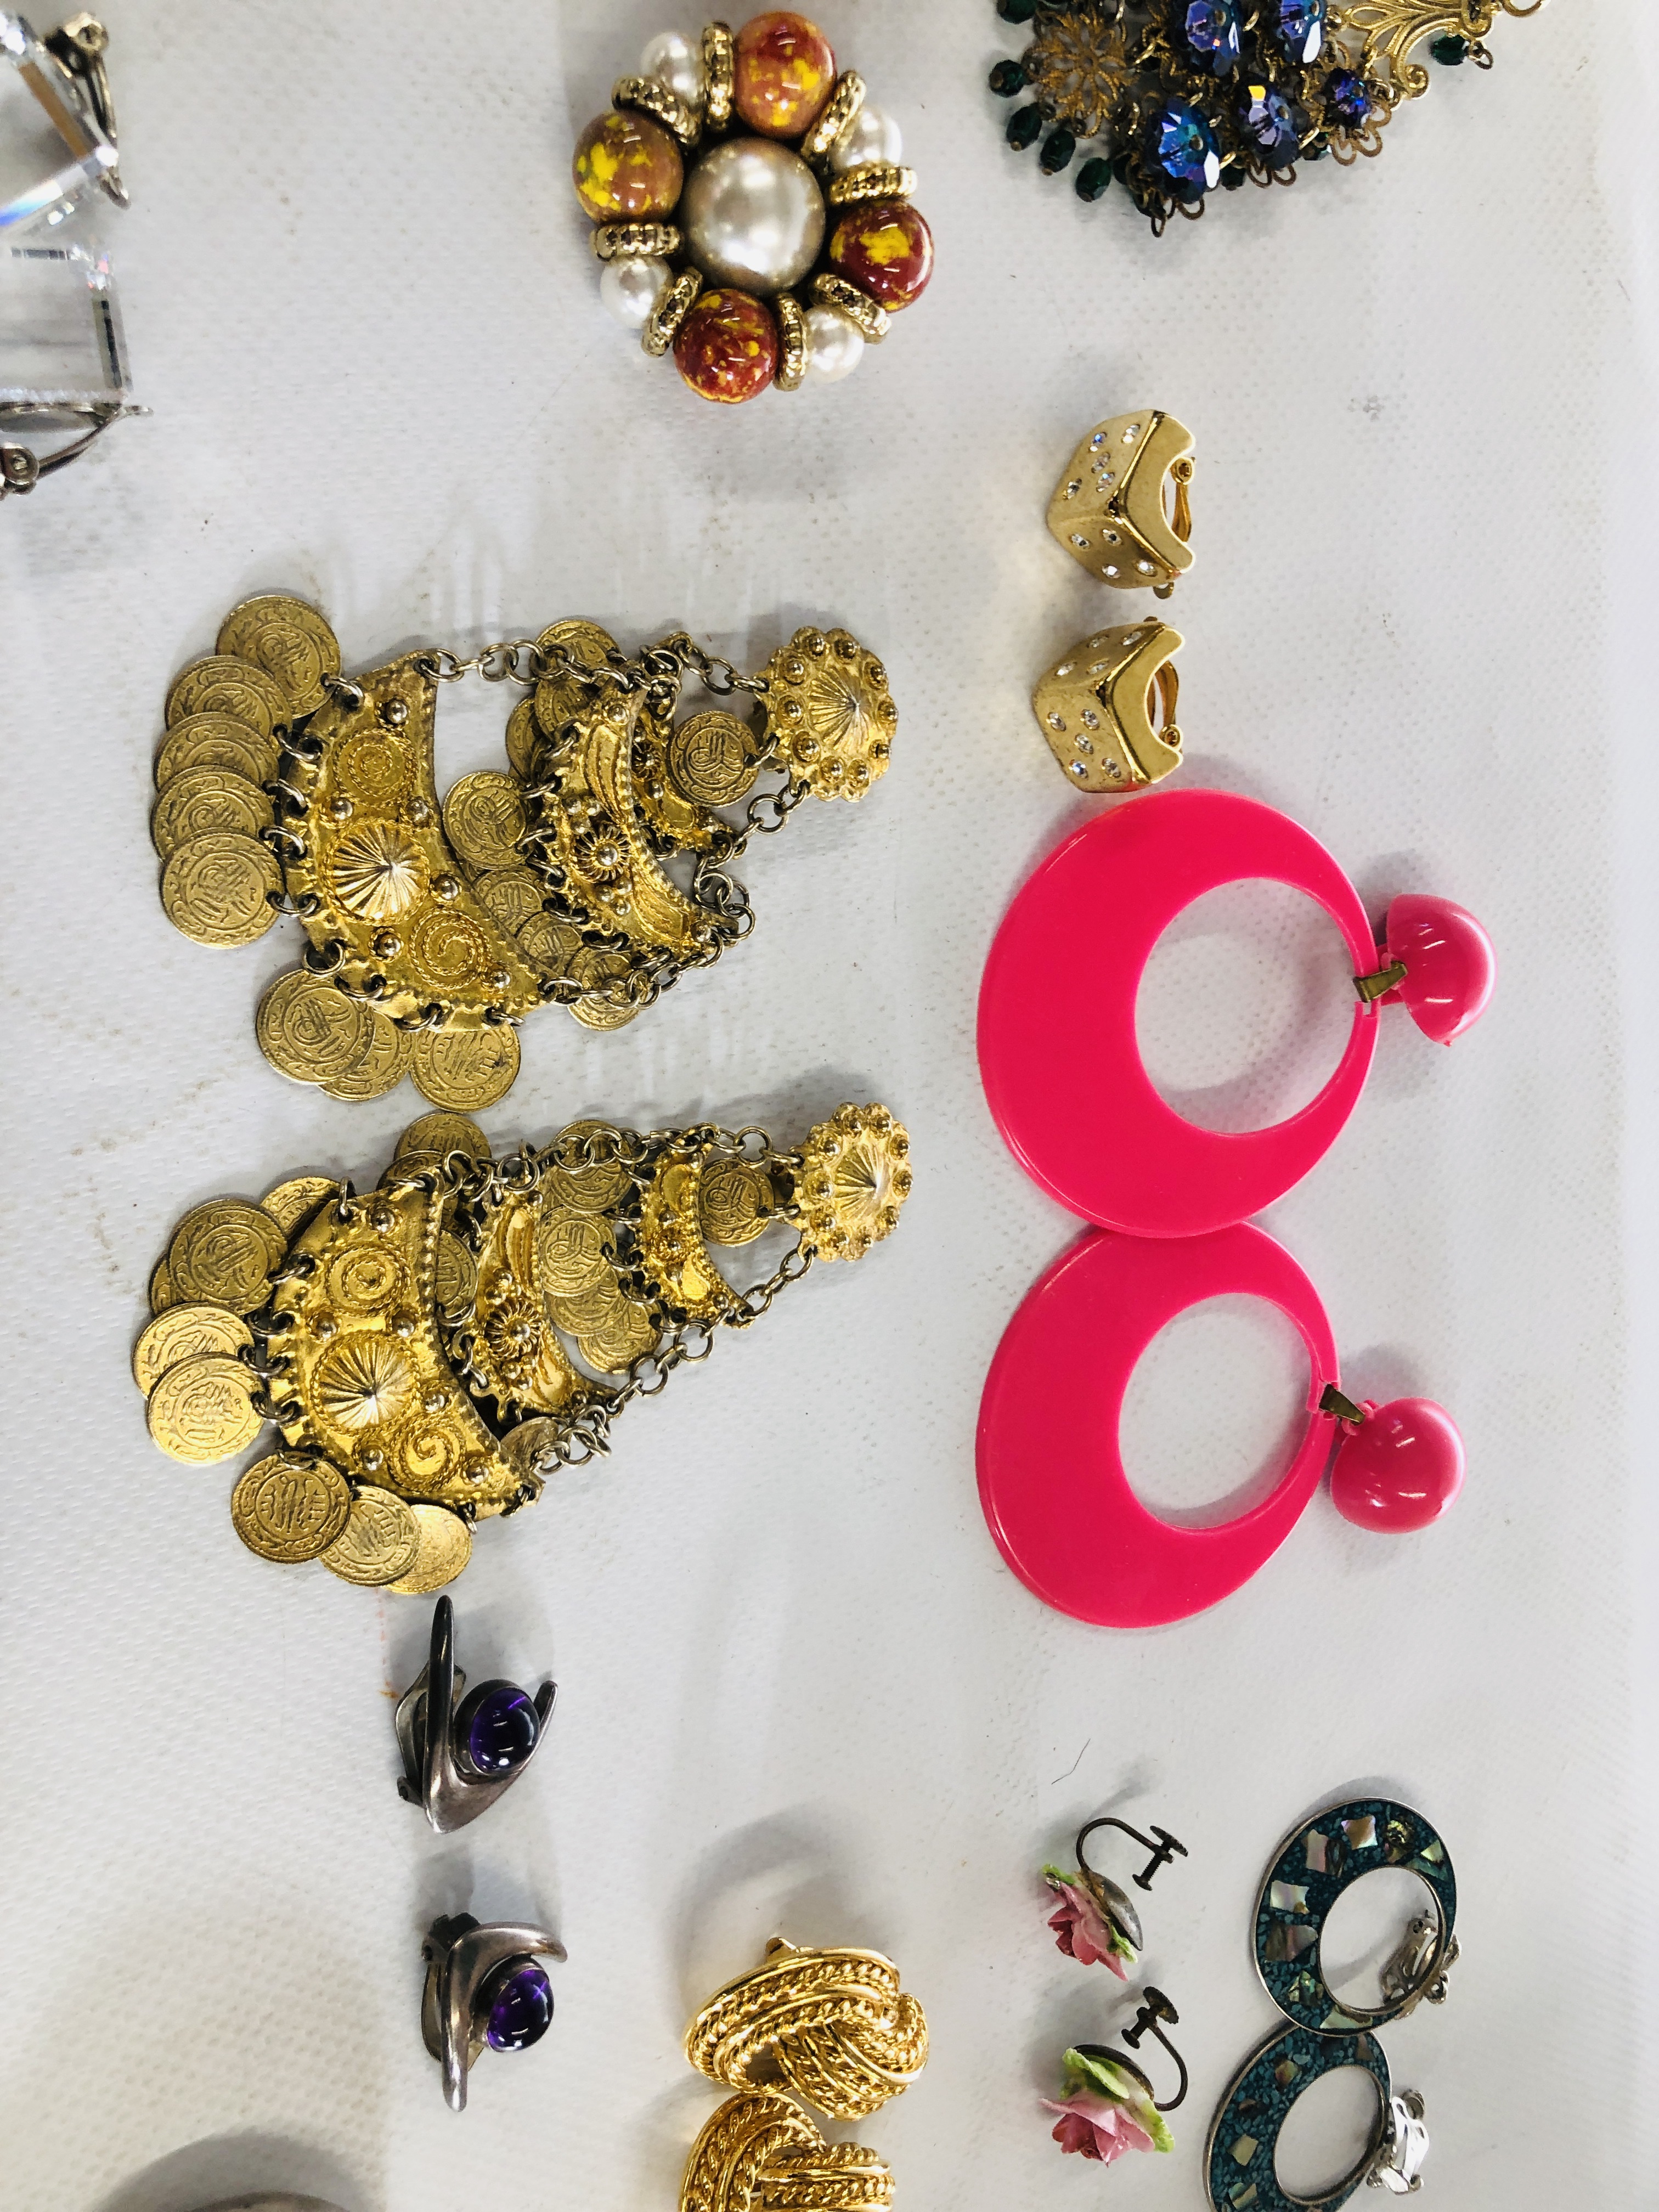 40 PAIRS OF VARIOUS CLIP ON COSTUME JEWELLERY EARRINGS. - Image 5 of 9